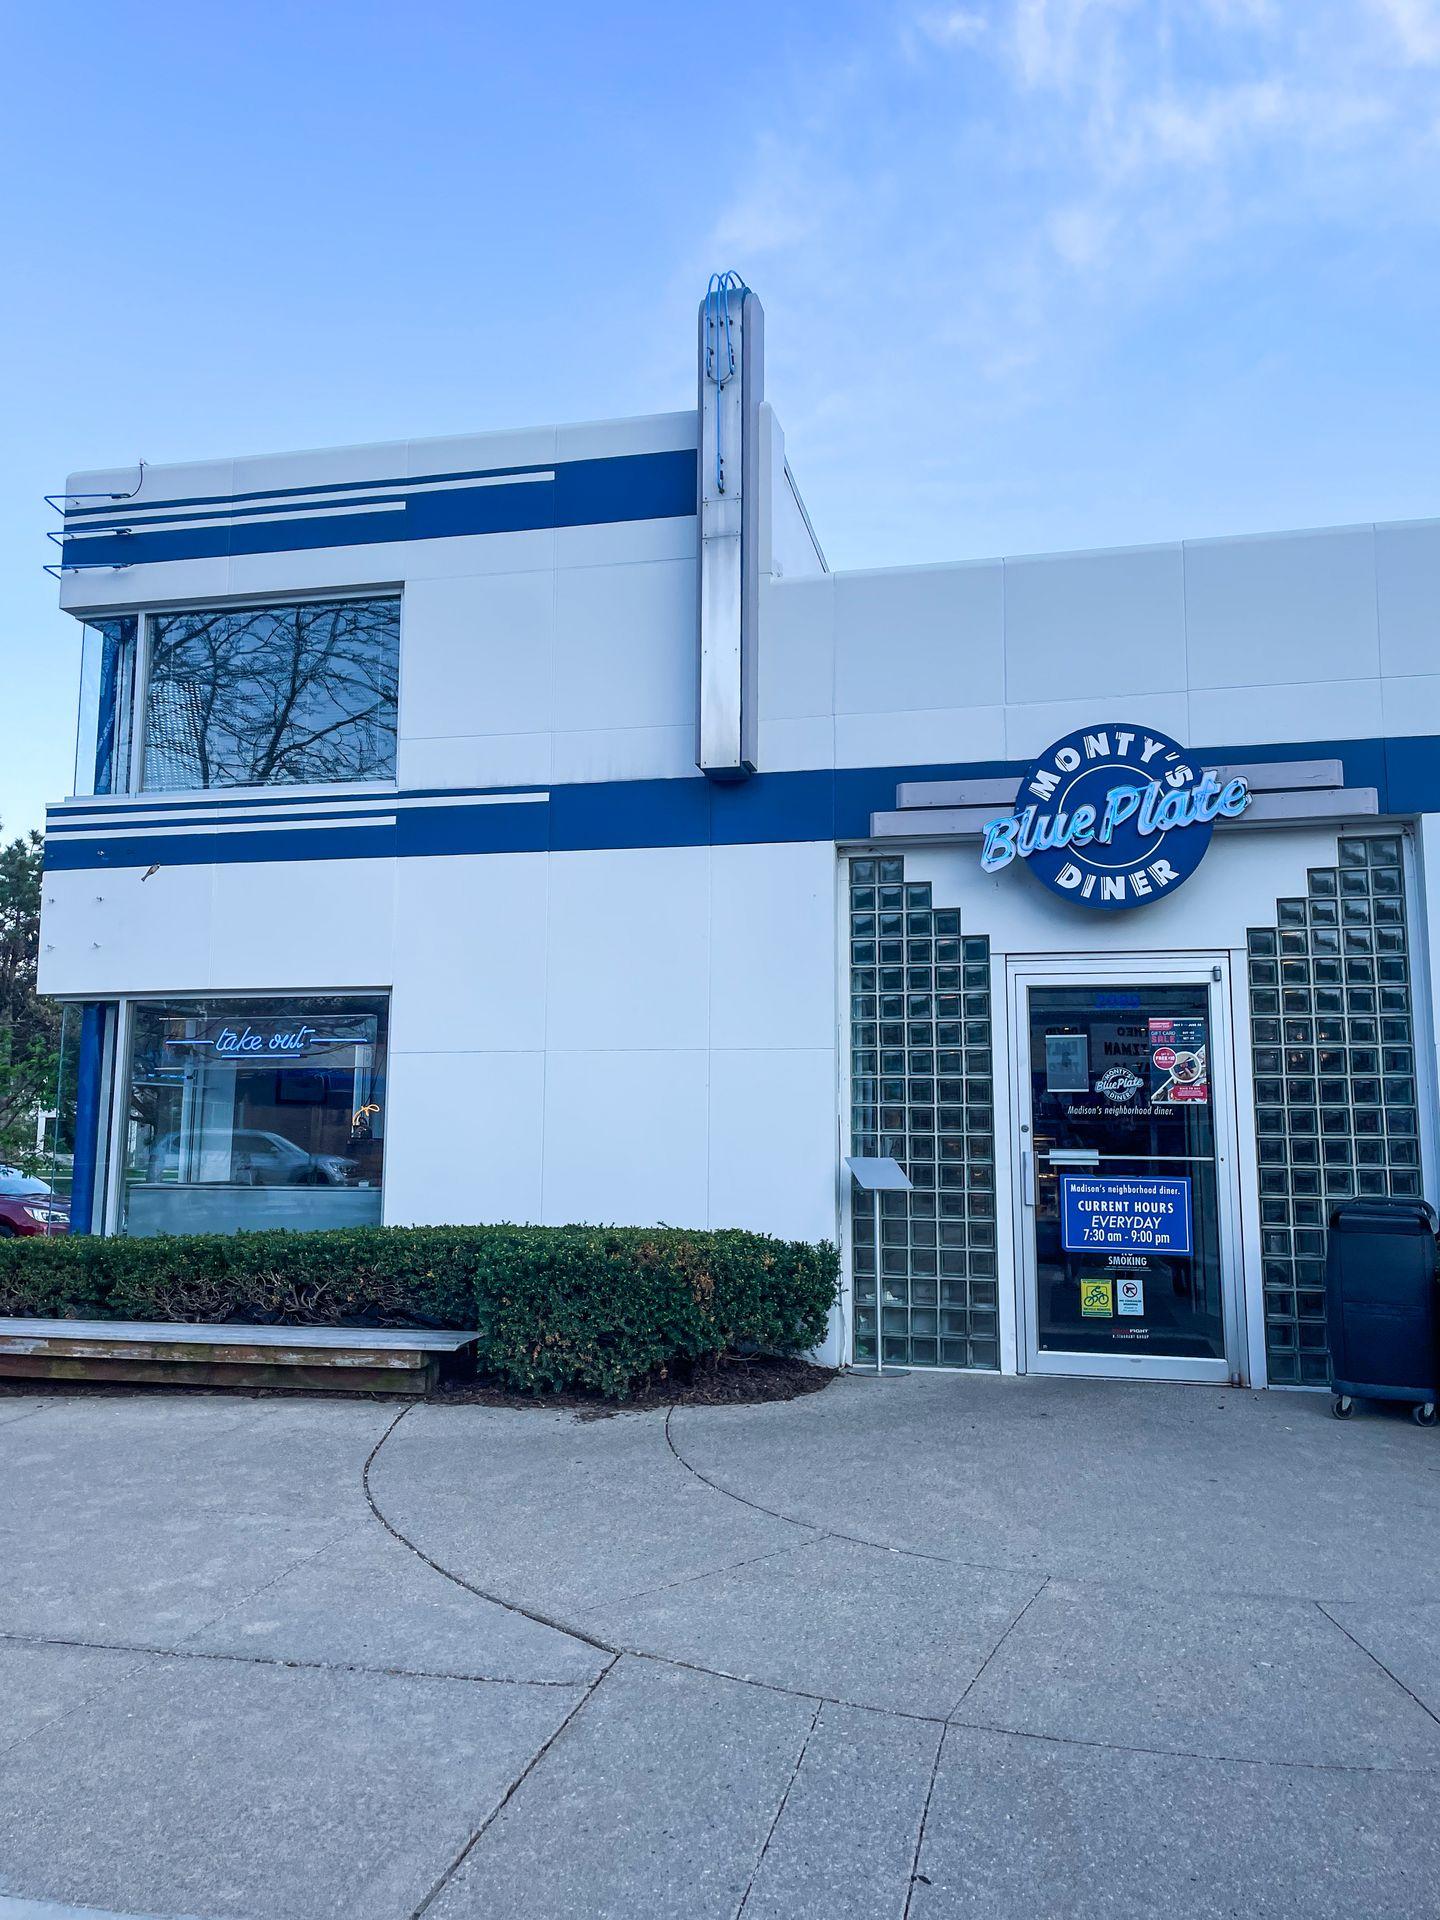 The exterior of Monty's Blue Plate Diner. The building is white with blue lettering and looks very retro.